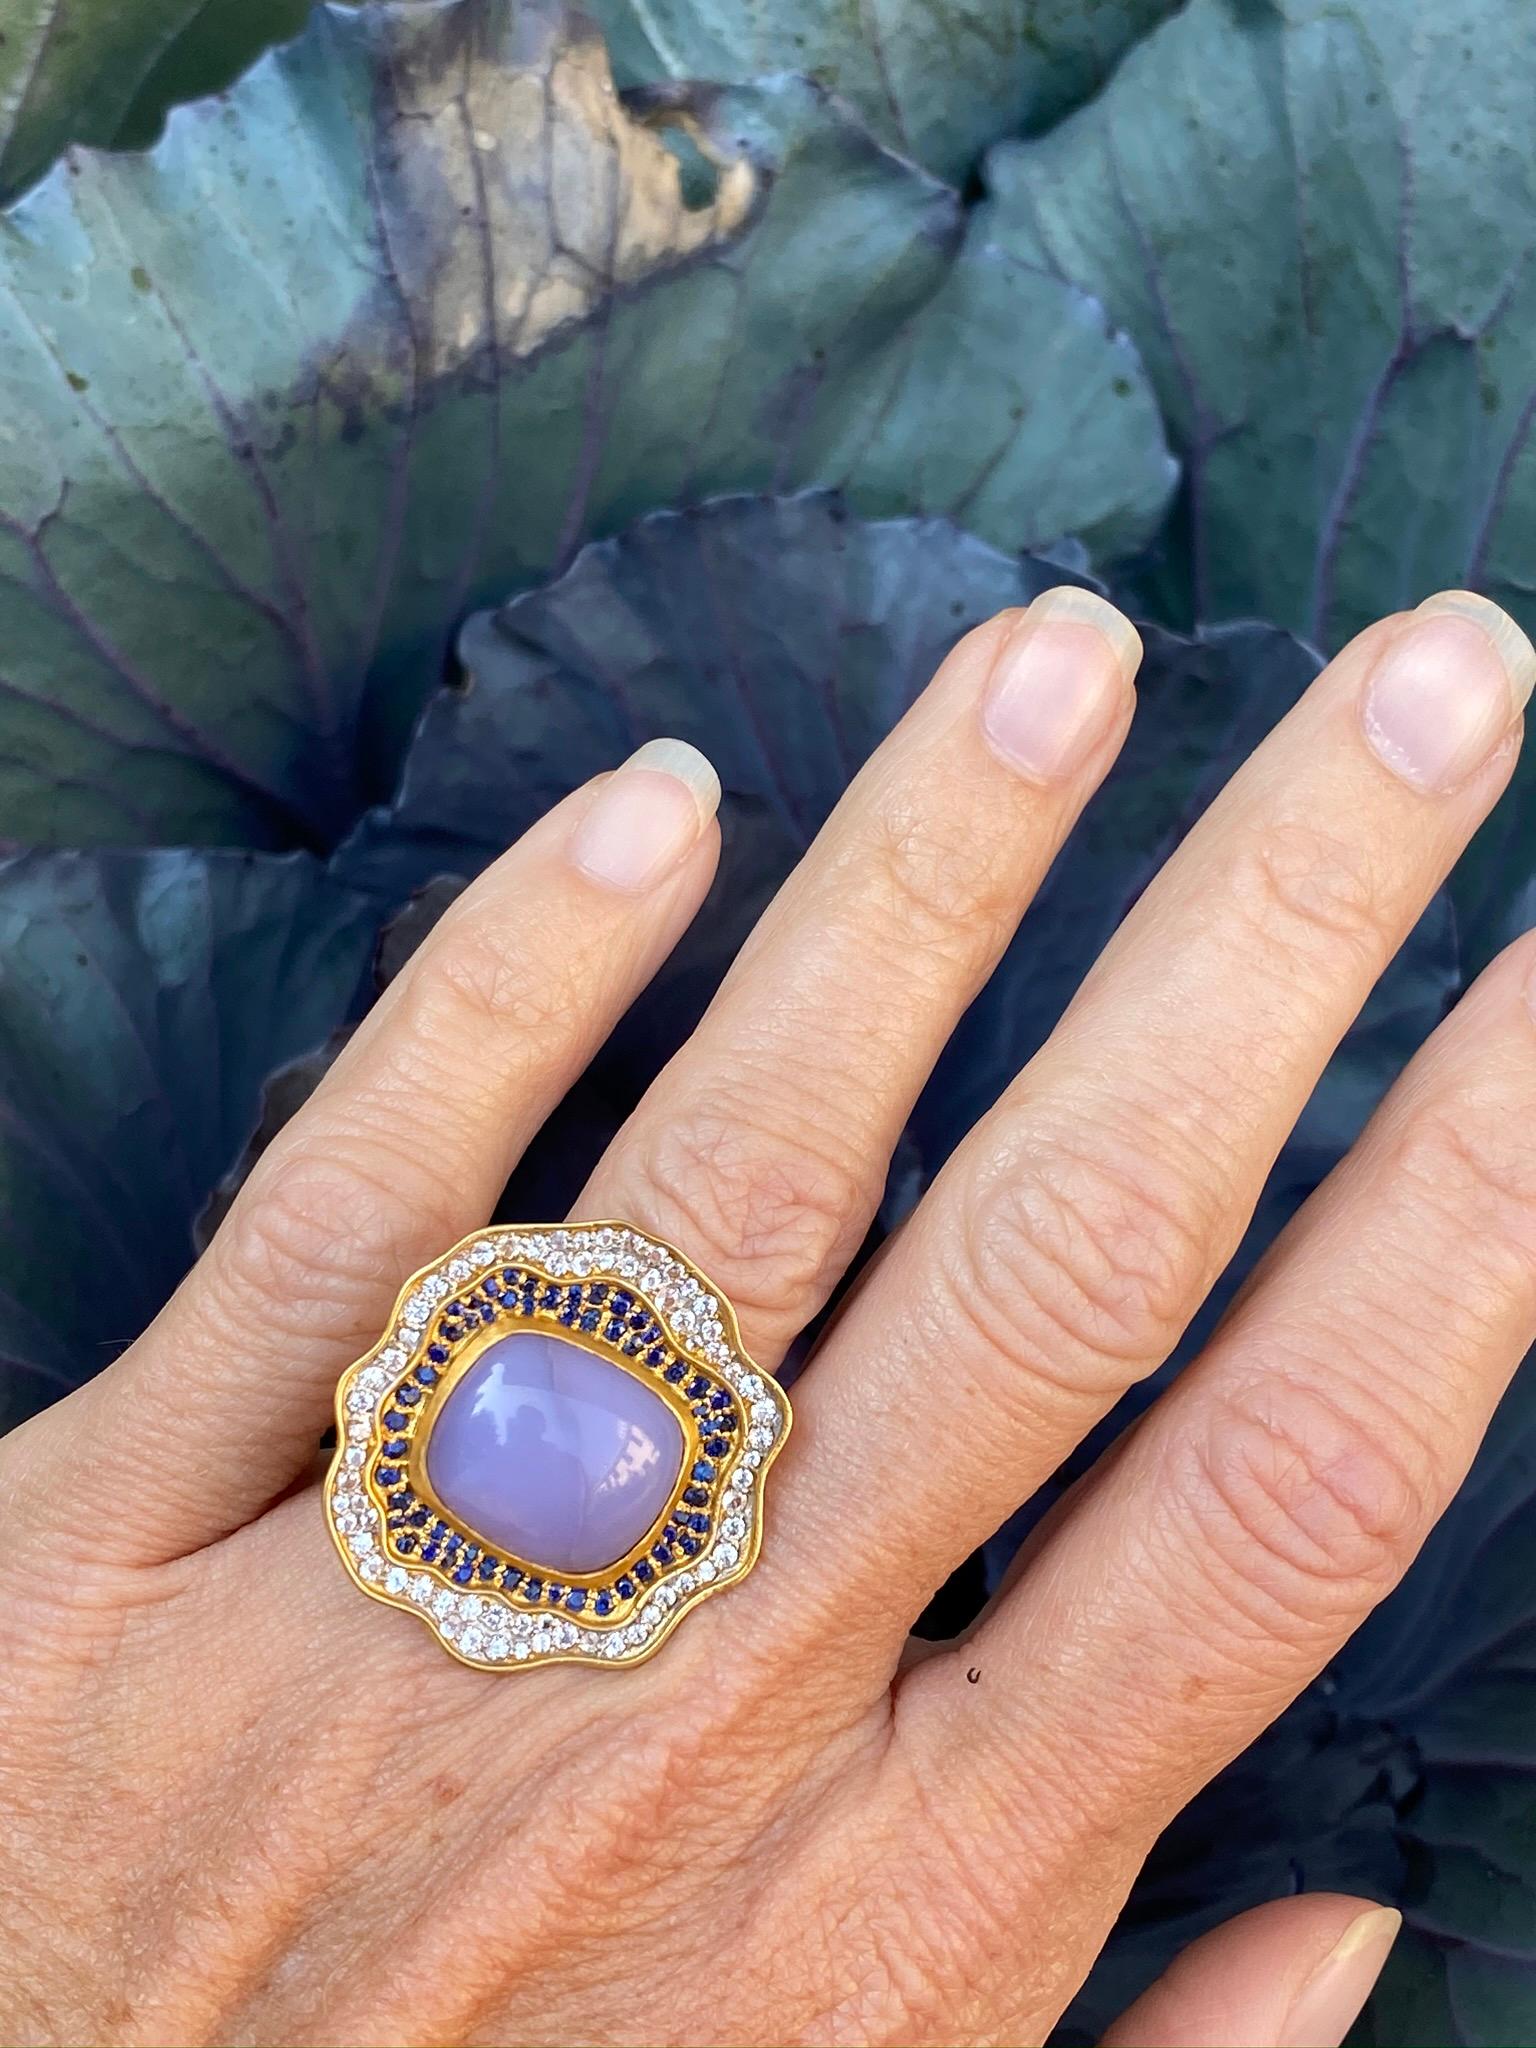 Designed by award winning jewelry designer, Lauren Harper, this Lavender Chalcedony cabochon center stone ring is surrounded by blue and white faceted sapphires and set in 18kt Gold. Extremely comfortable to wear. Sits with a low profile on the